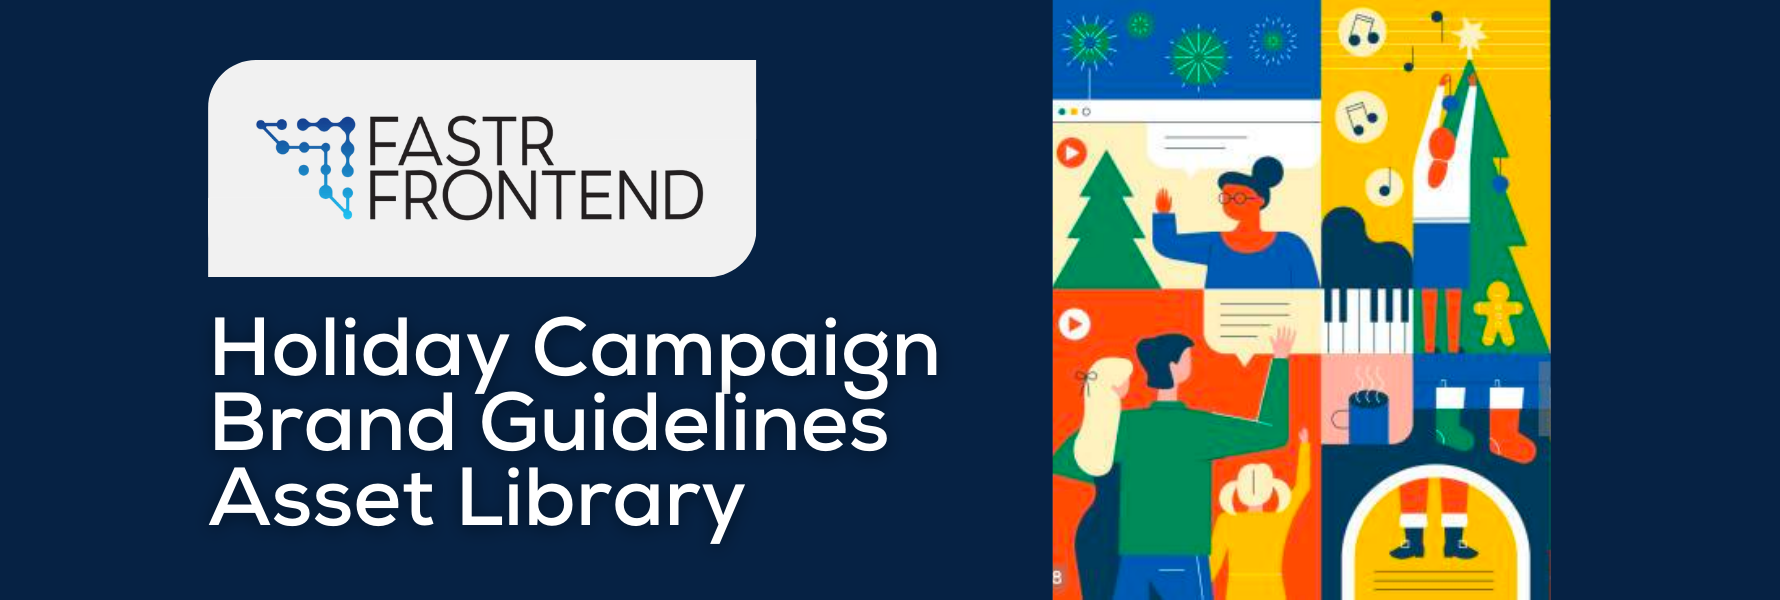 Fastr Frontend: Holiday Campaign Brand Guidelines Asset Library